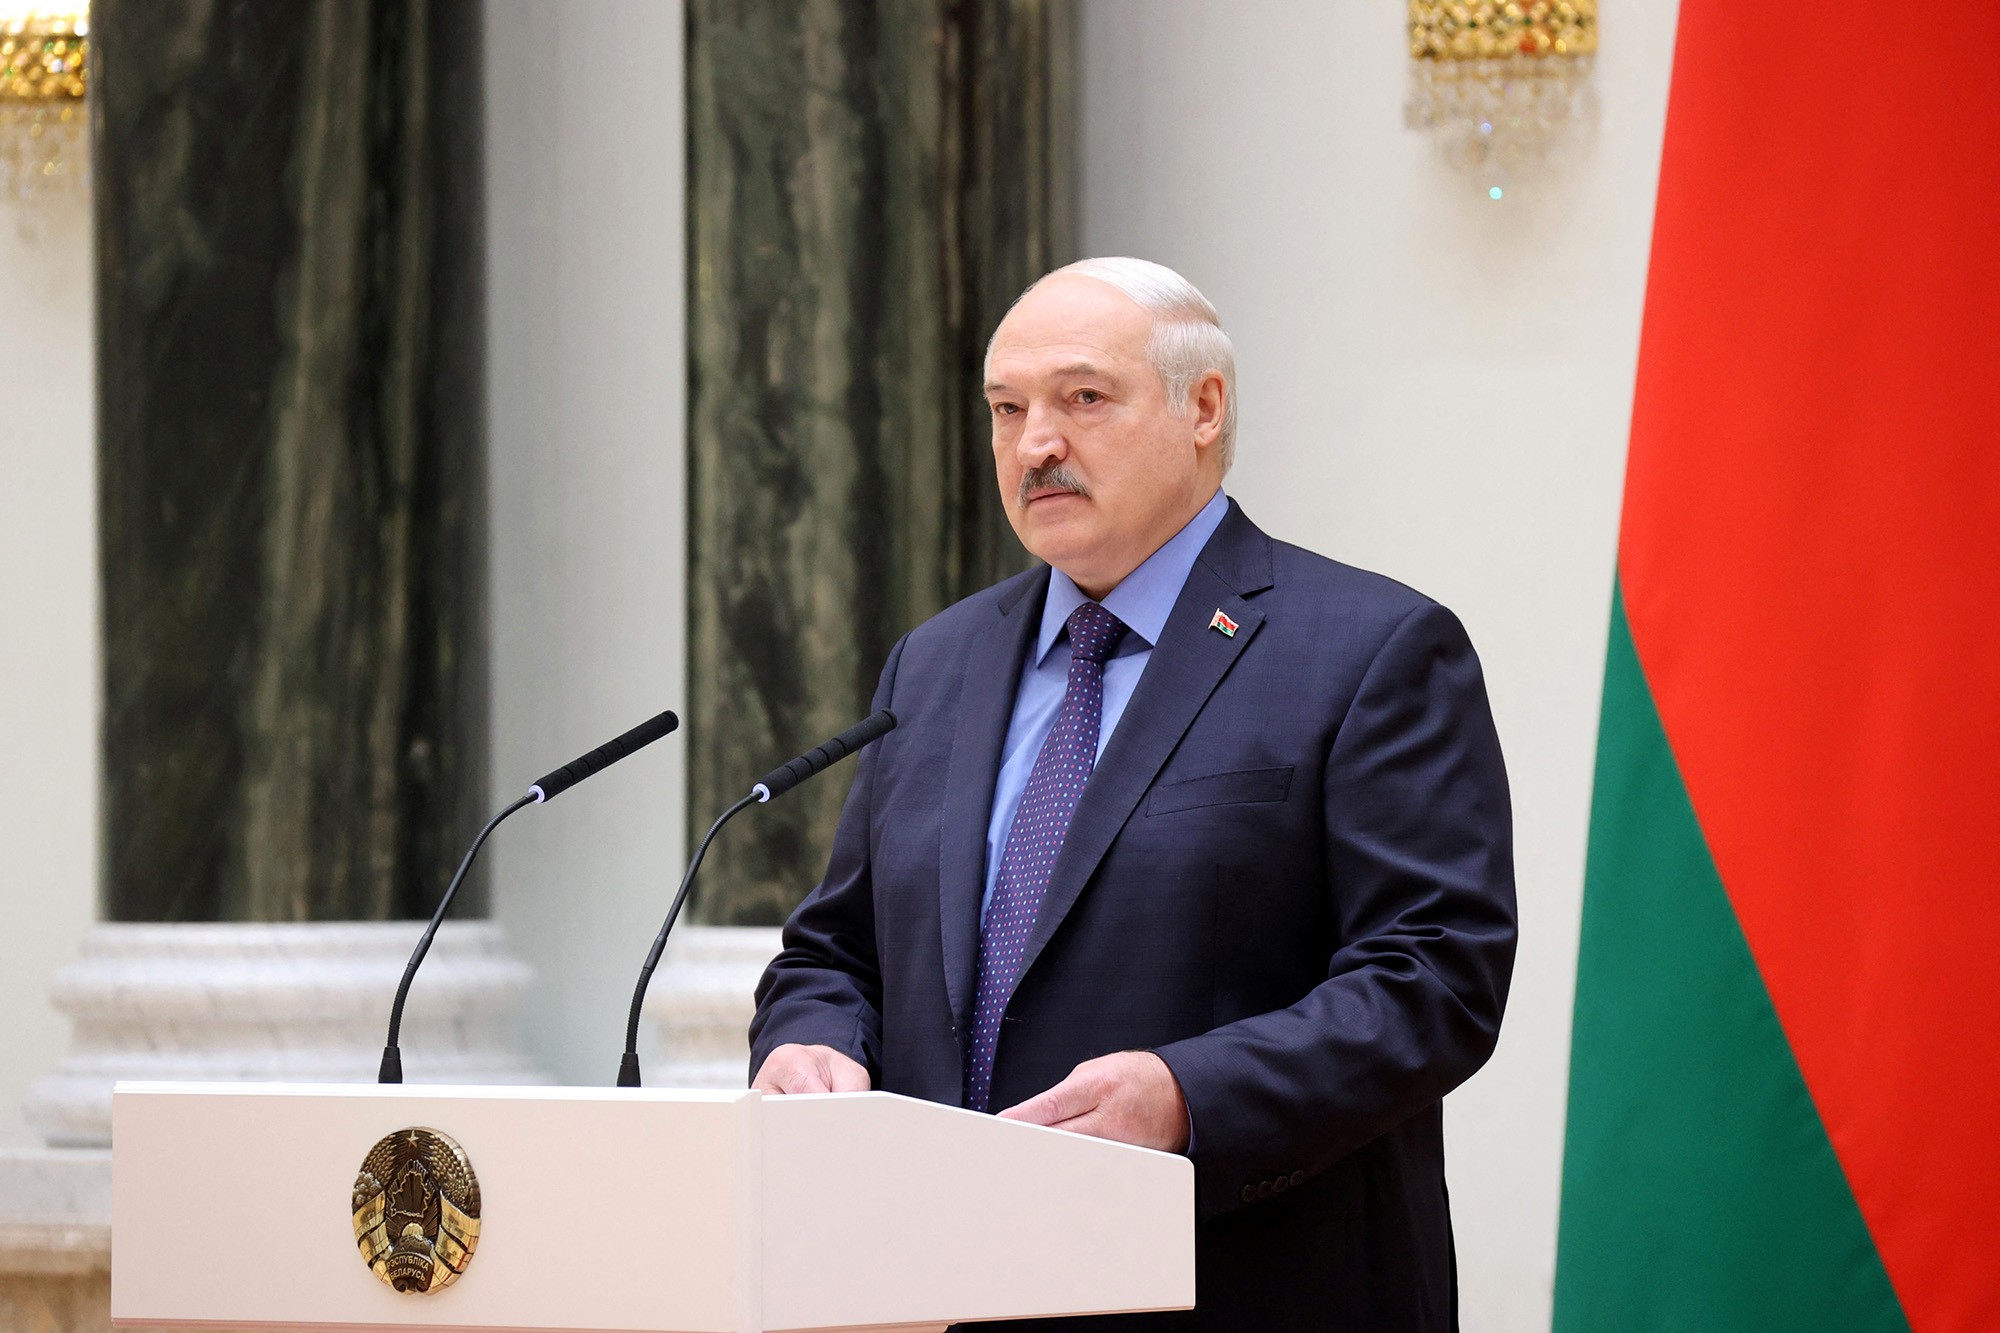 Belarusian President Alexander Lukashenko delivers a speech during a meeting with high-ranking military officers in Minsk, Belarus, on June 27.